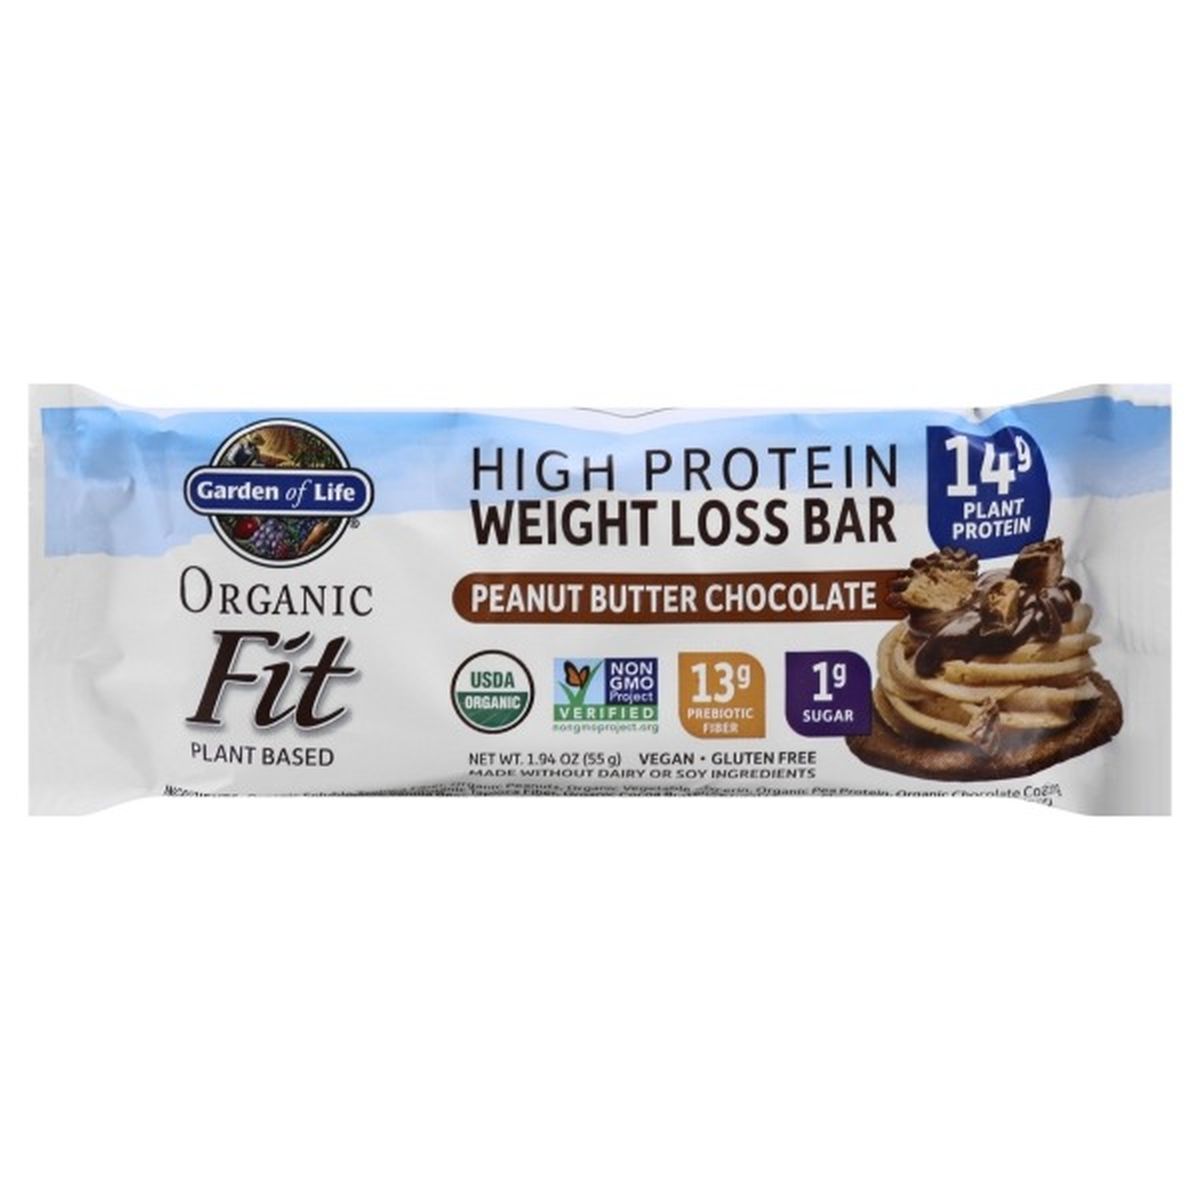 Calories in Garden of Life Organic Fit Weight Loss Bar, High Protein, S'mores